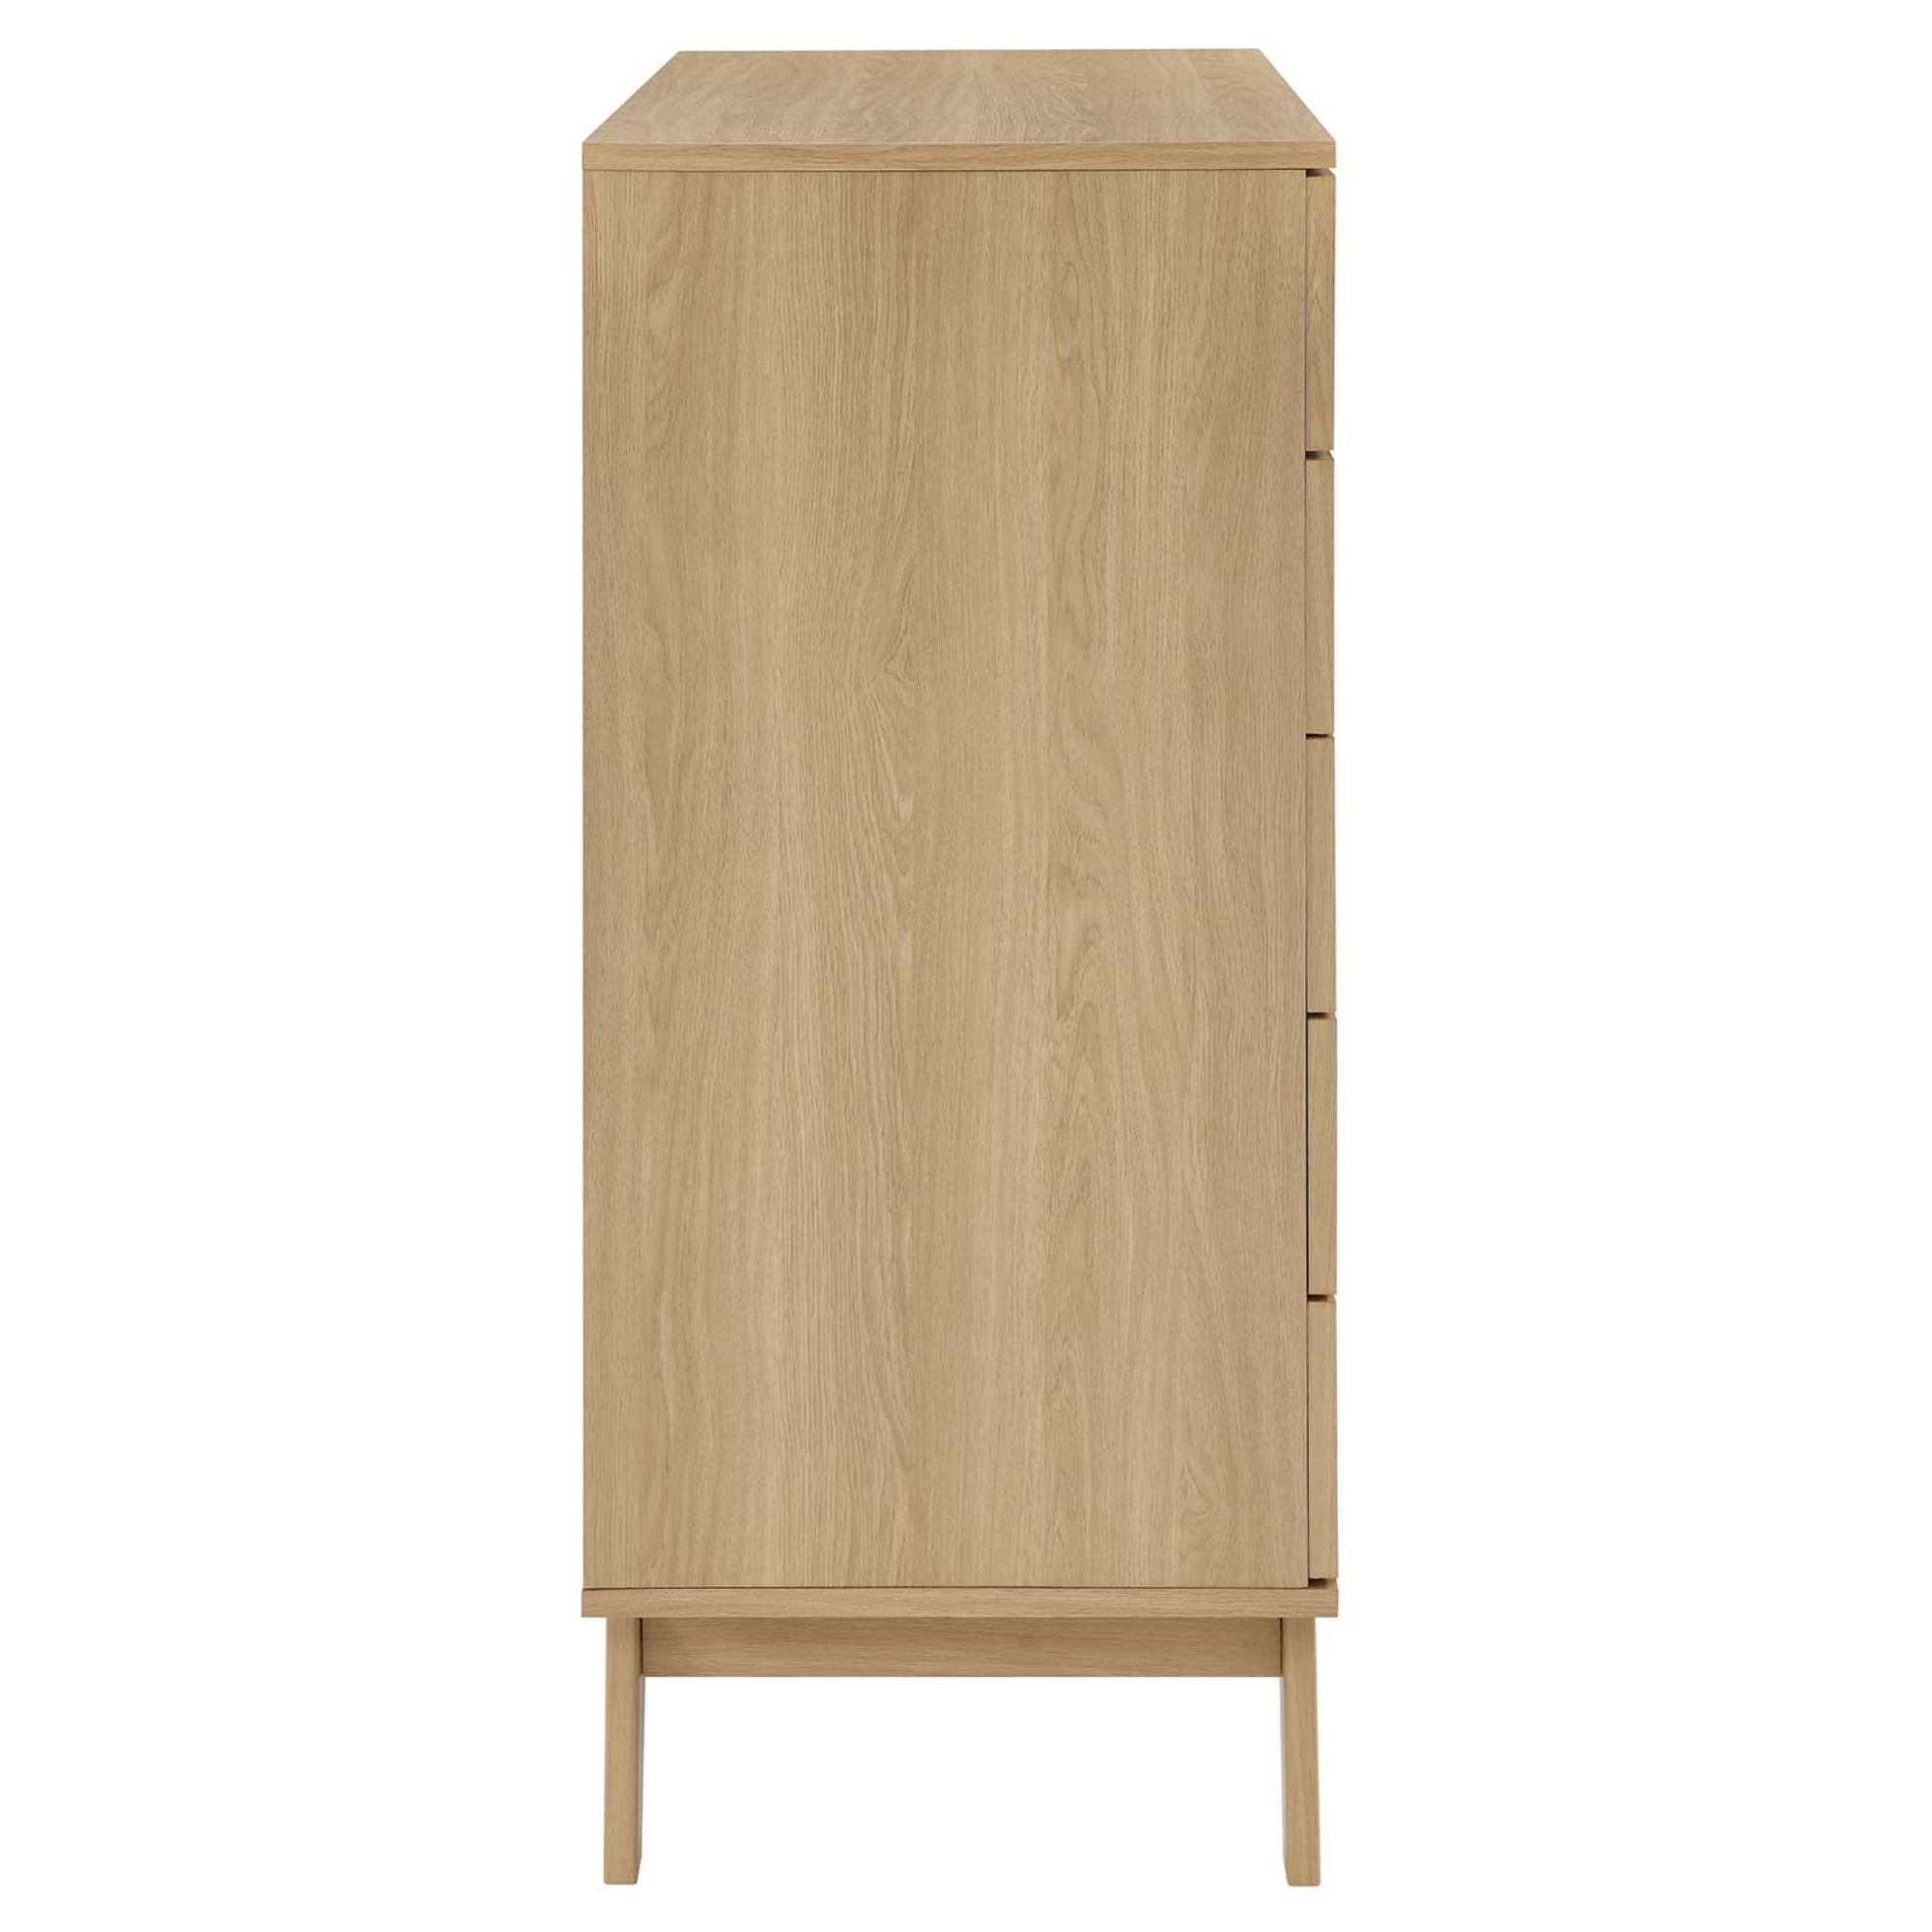 Ergode 5-Drawer Chest with Rattan Weave Fronts - Durable MDF and Particleboard Construction - Ample Storage Space - Natu